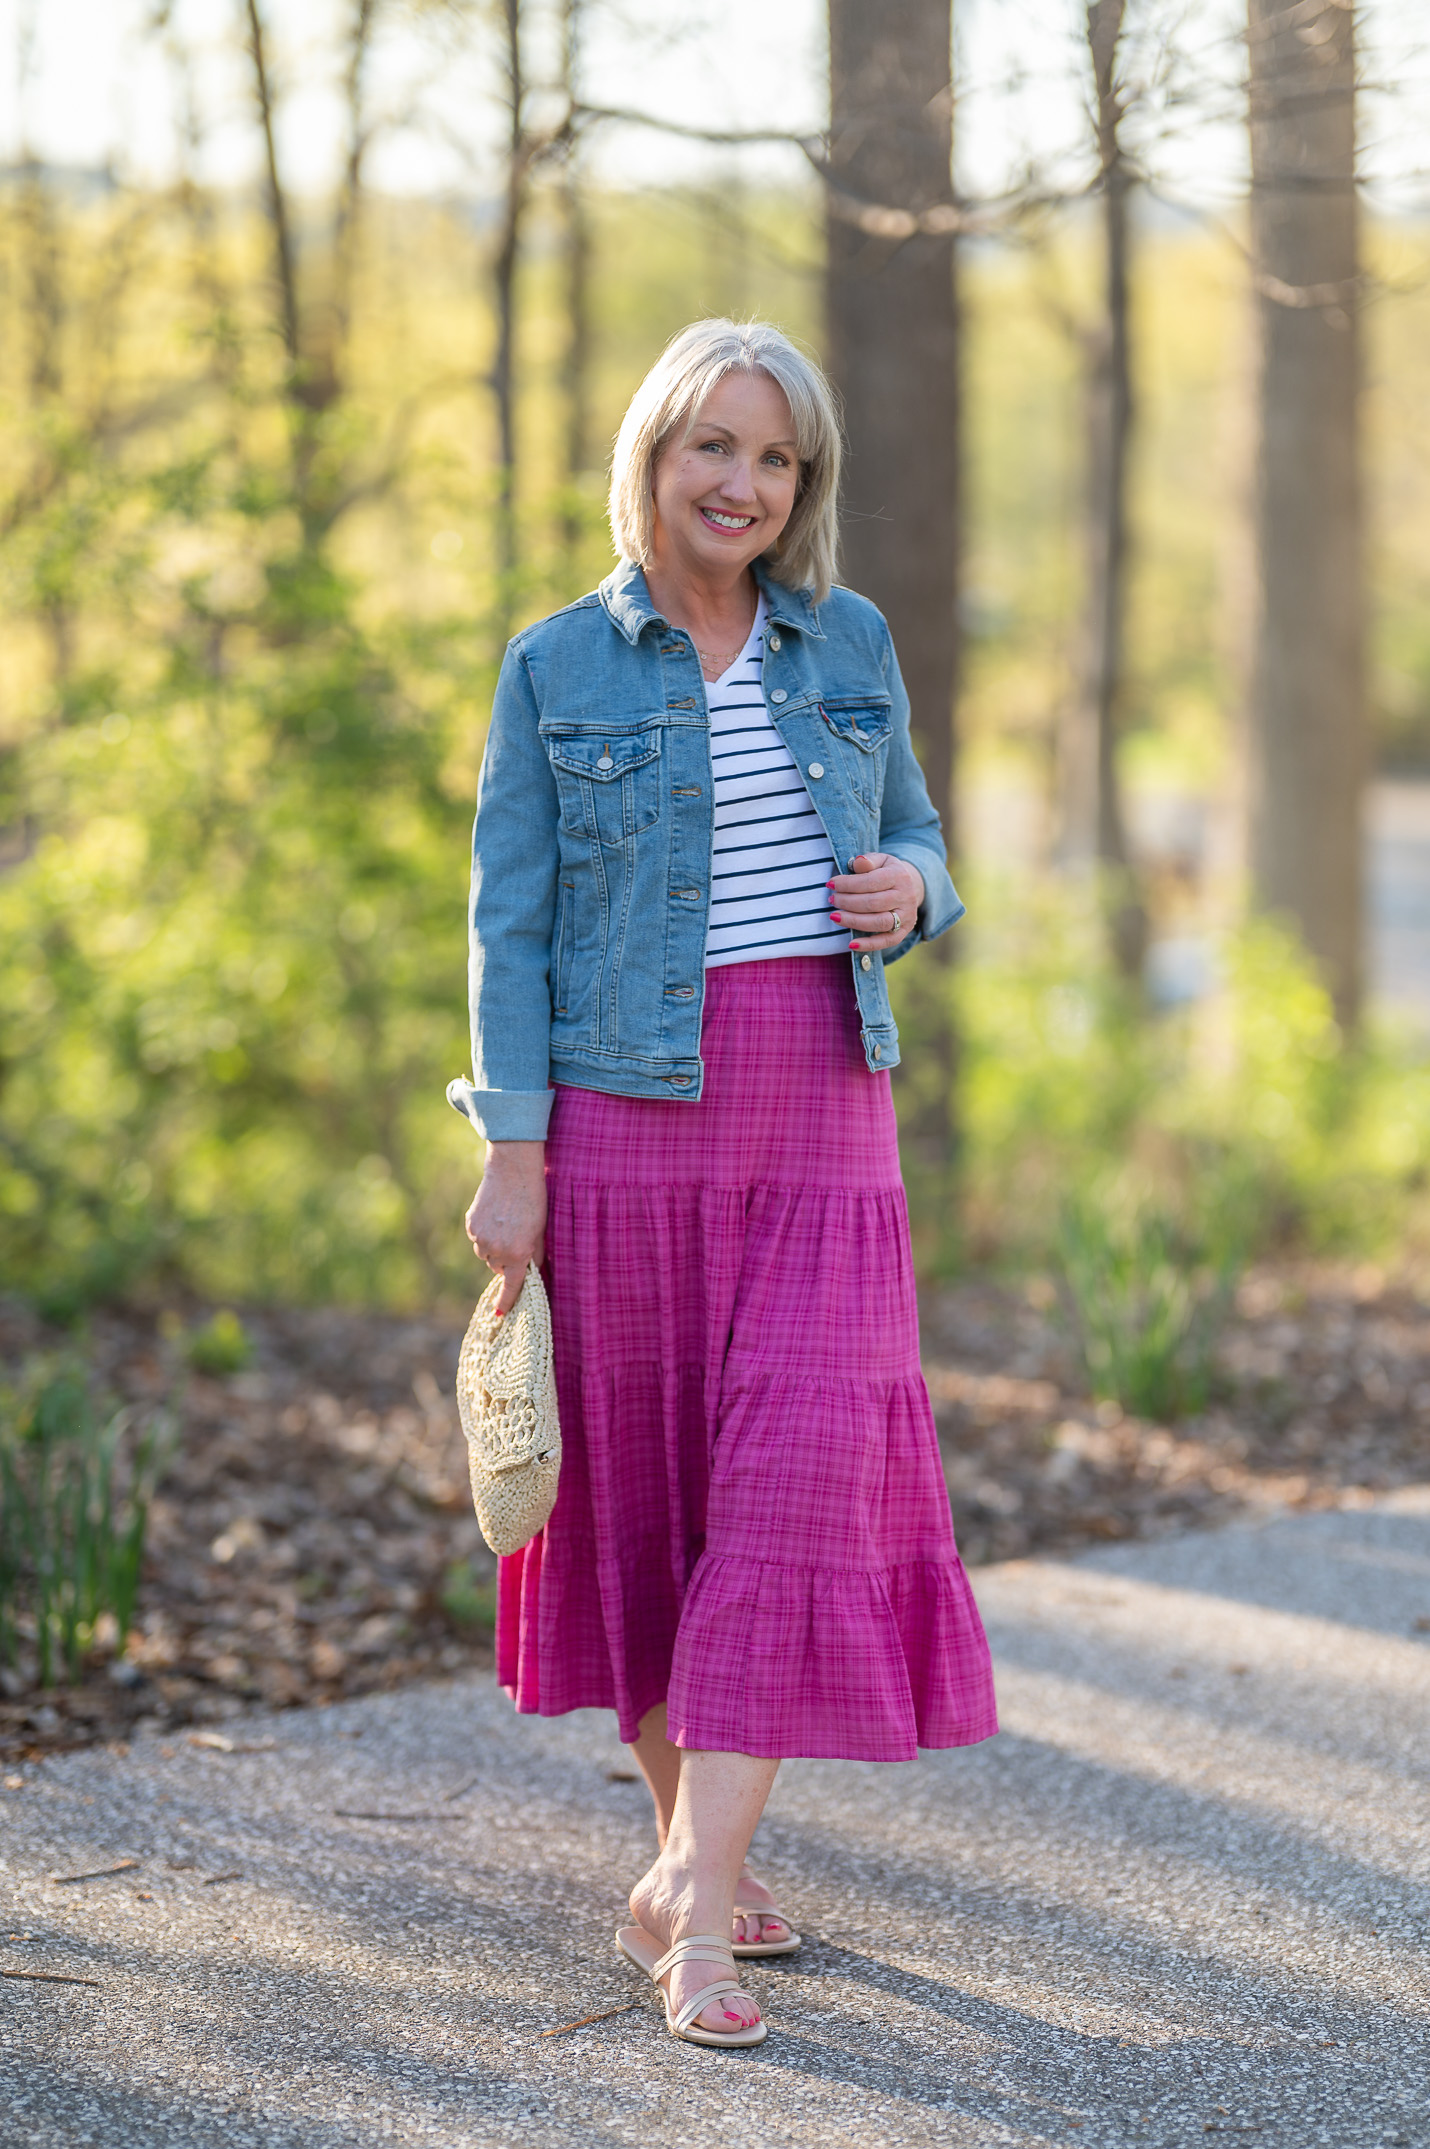 Bright Pink Tiered Skirt and Striped Tee